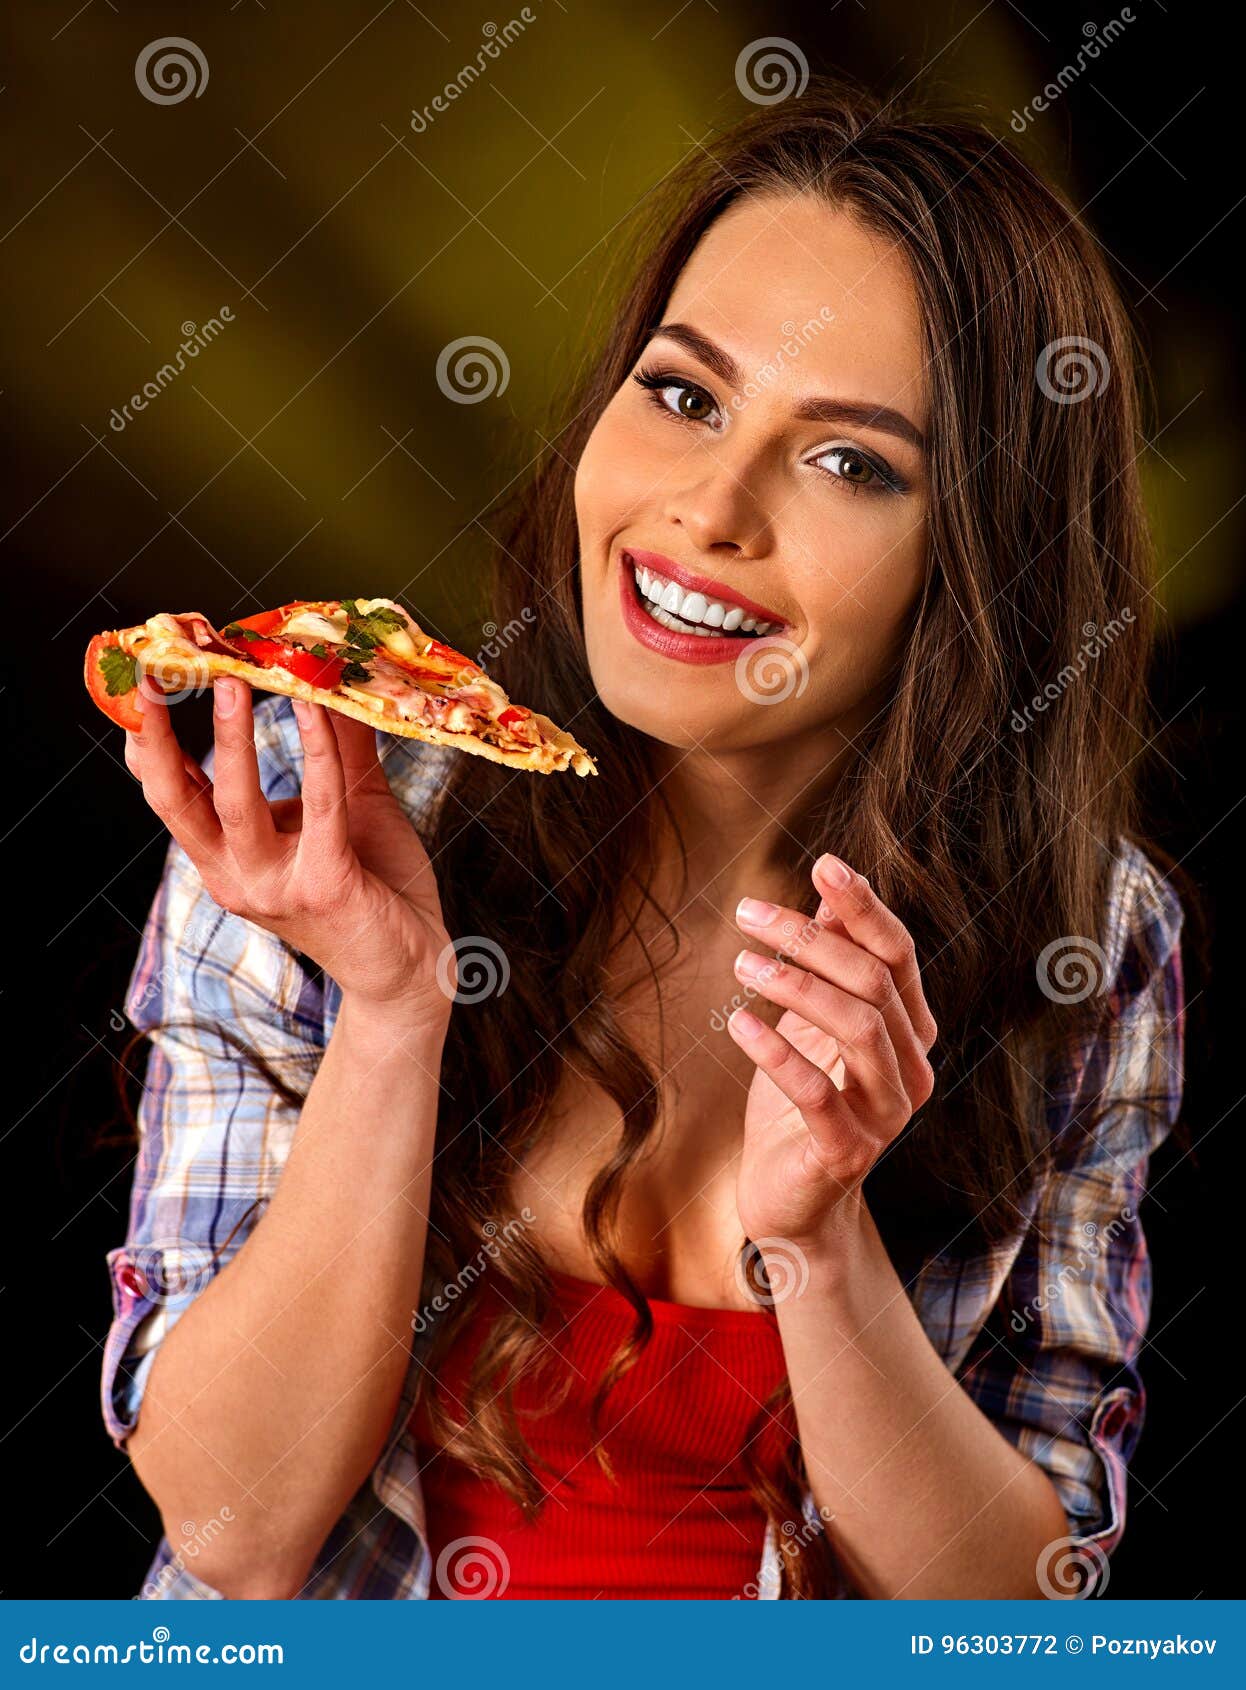 Woman Eating Slice Of Italian Pizza Student Con